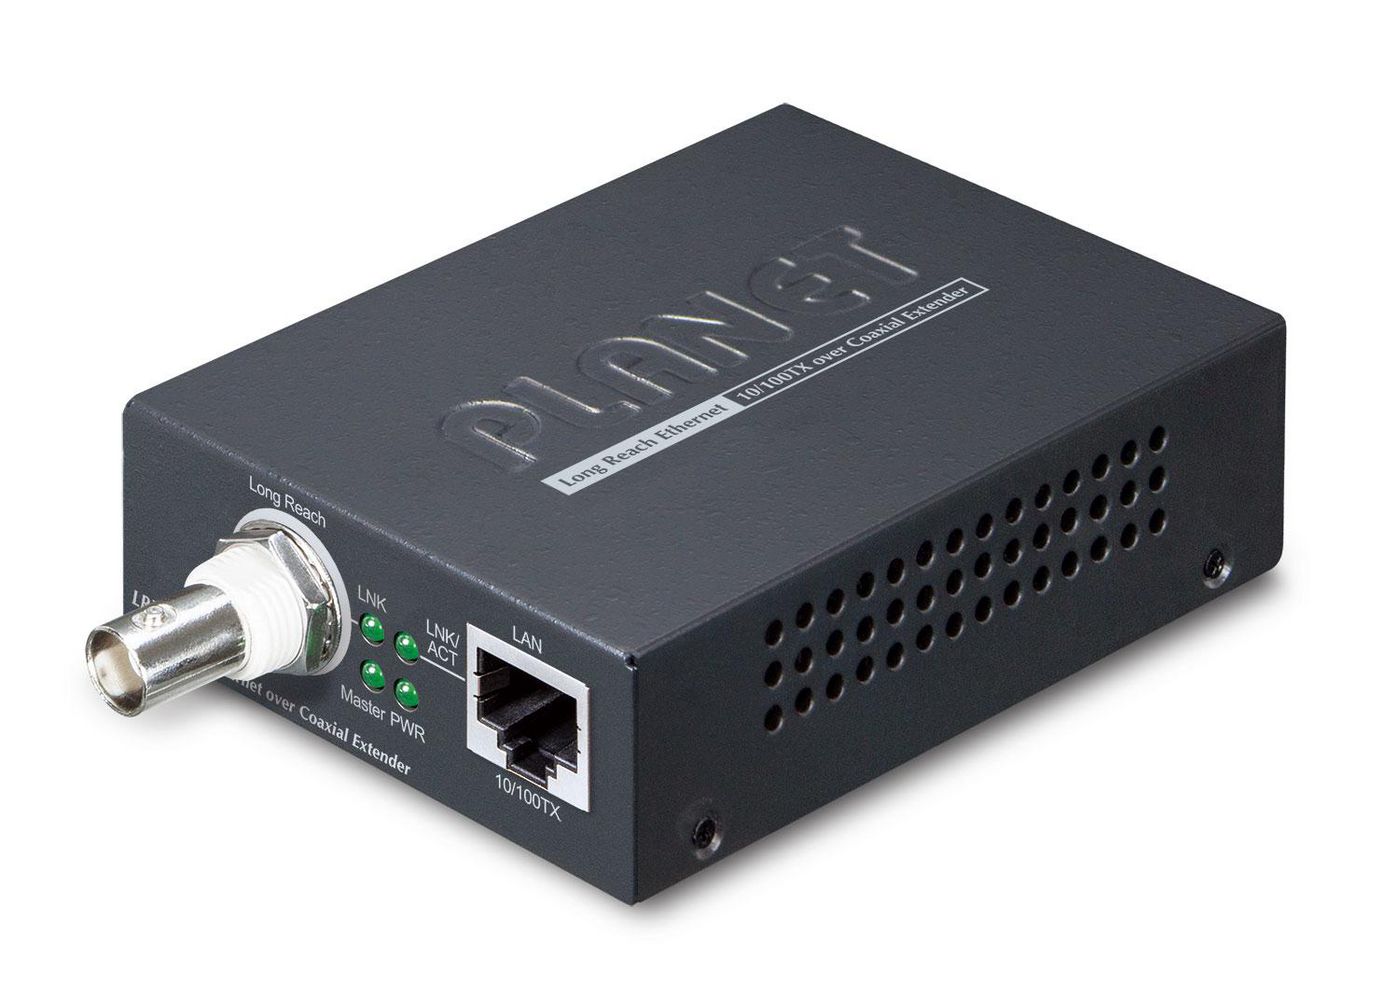 Planet LRE-101C W127112209 1-Port 10100TX Ethernet over 